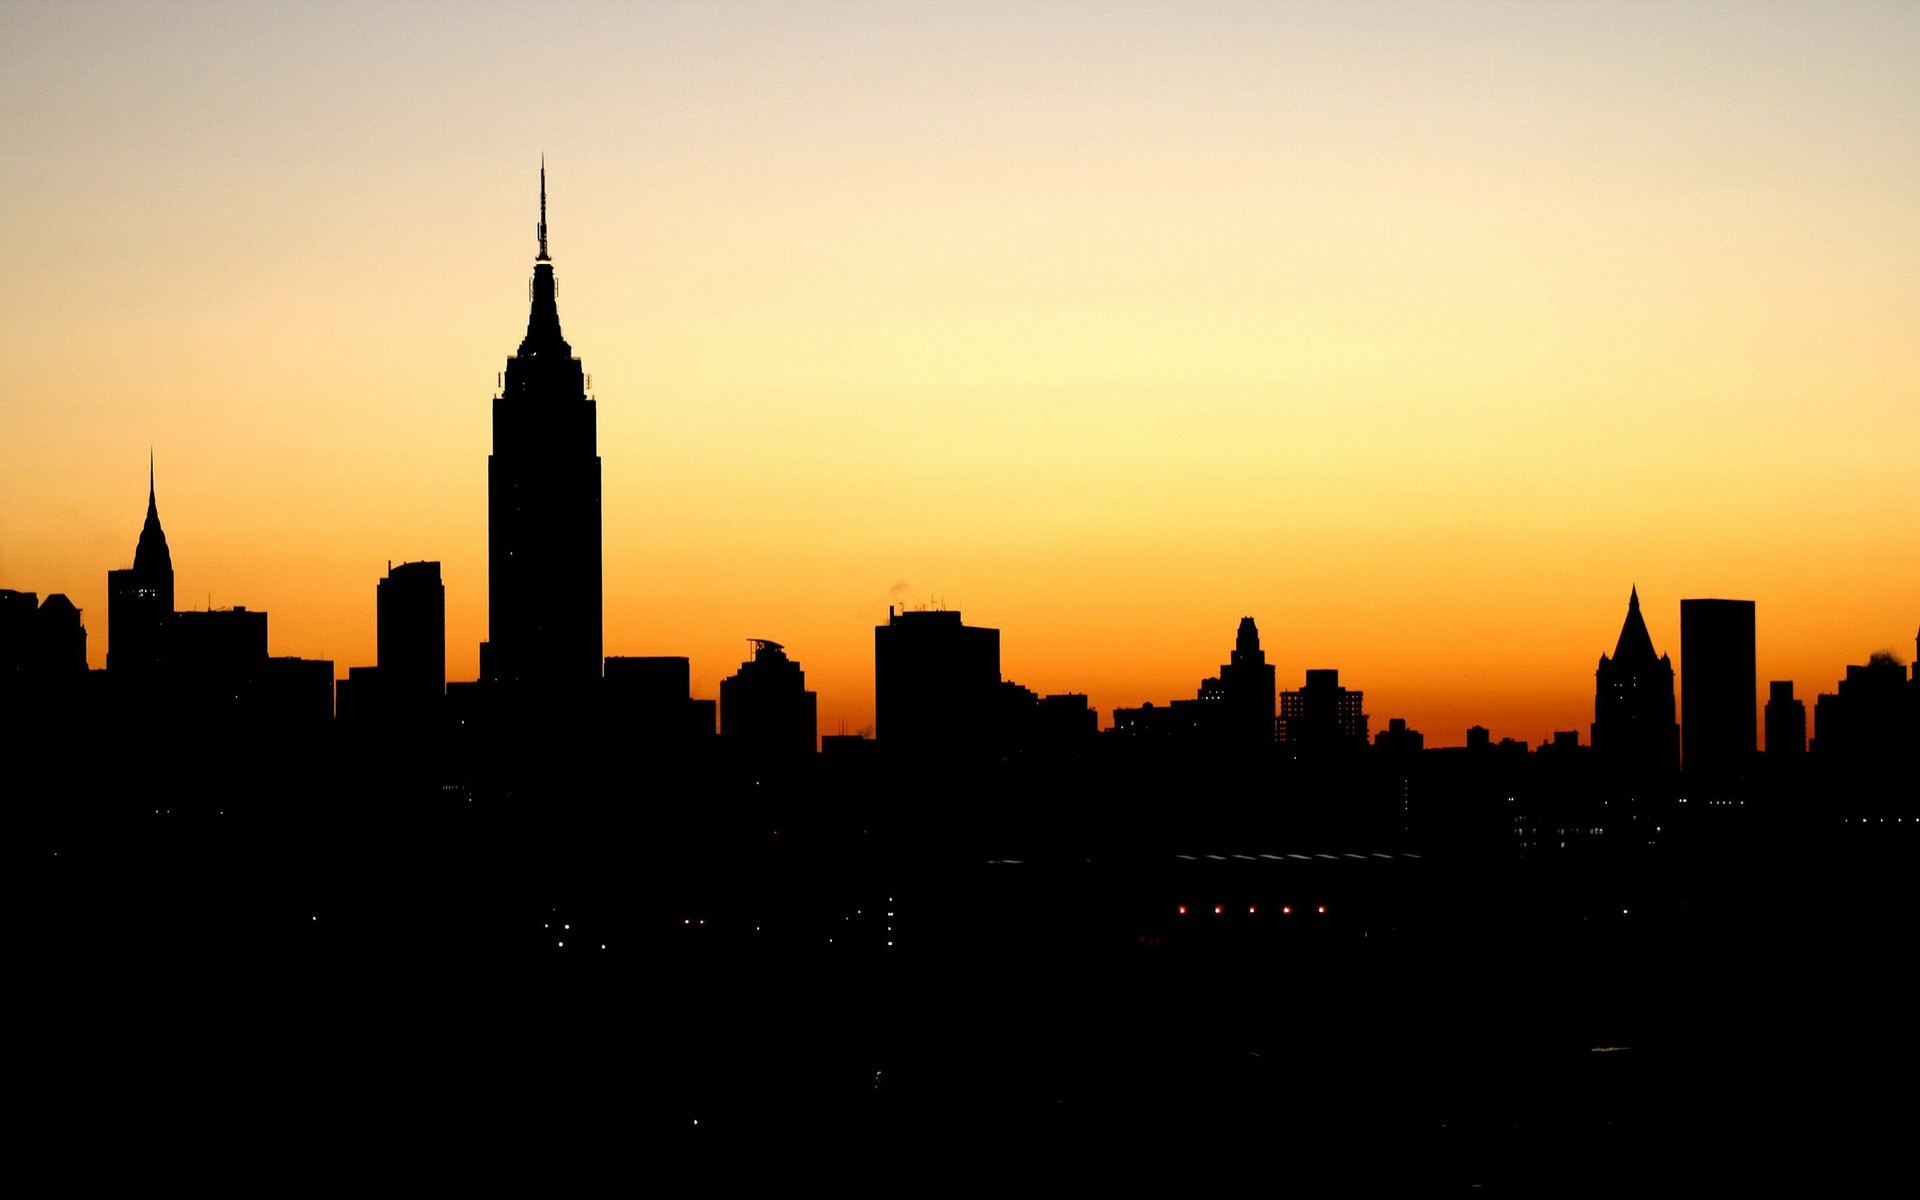 Skyline City Silhouette 21816 Hd Wallpapers in Skyline   Imagescicom 1920x1200